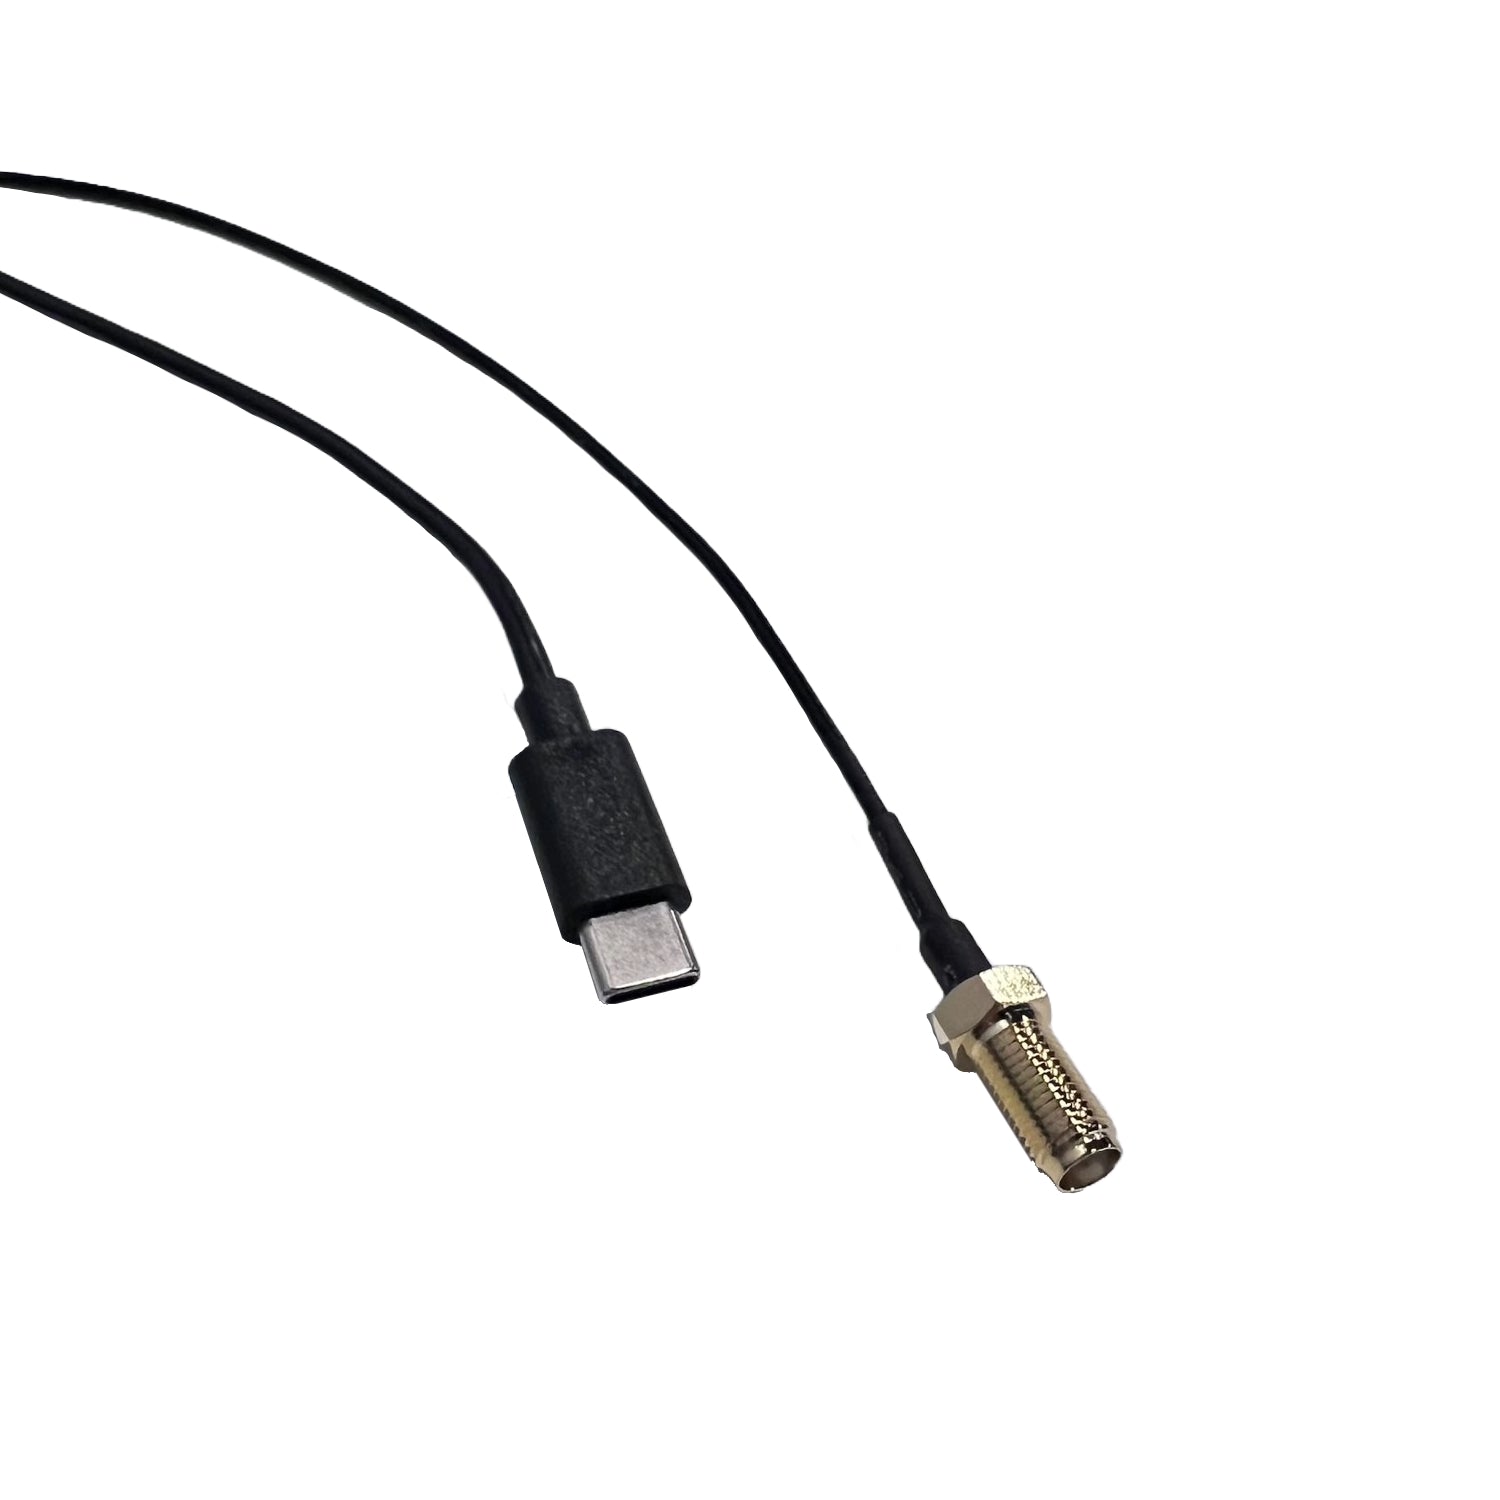 USB-C and Antenna Cables